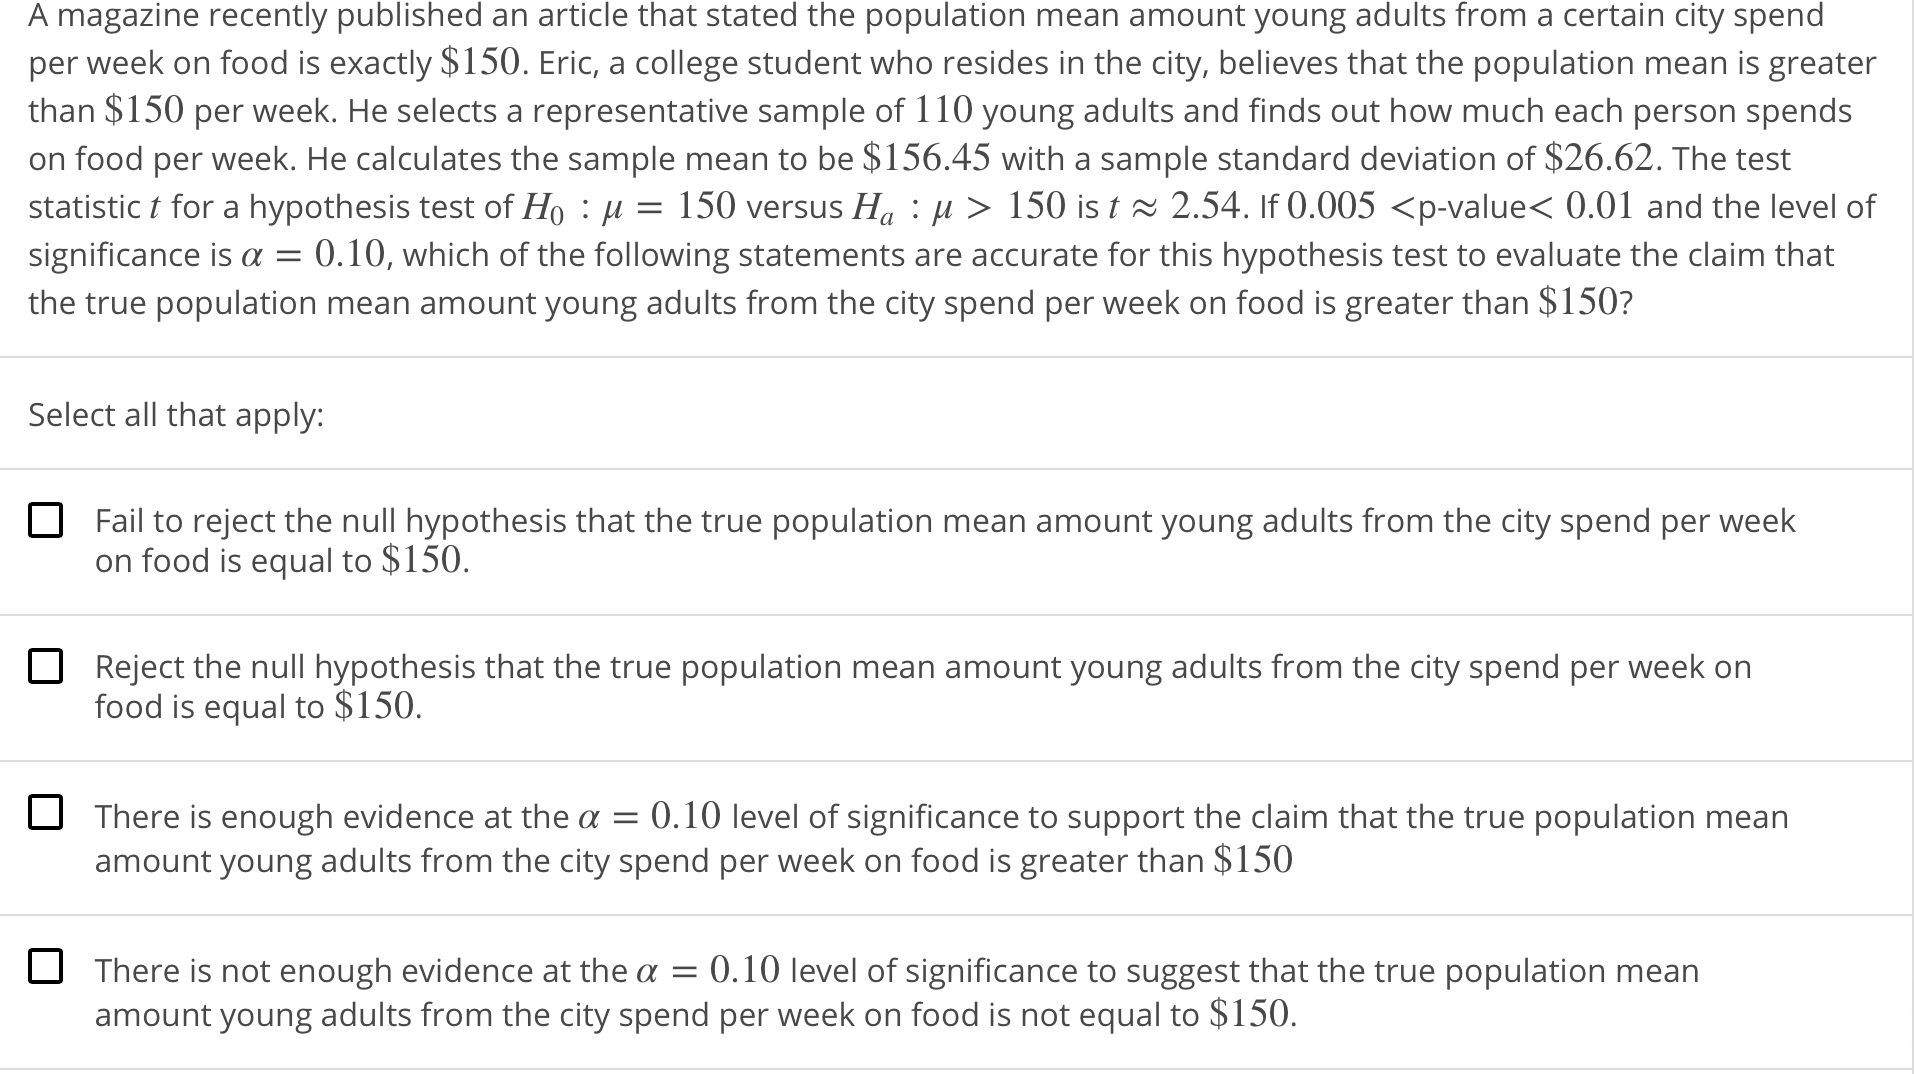 A magazine recently published an article that stated the population mean amount young adults from a certain city spend
per week on food is exactly $150. Eric, a college student who resides in the city, believes that the population mean is greater
than $150 per week. He selects a representative sample of 110 young adults and finds out how much each person spends
on food per week. He calculates the sample mean to be $156.45 with a sample standard deviation of $26.62. The test
statistic ț for a hypothesis test of Ho : μ = 150 versus Ha : μ 〉 150 ist 2.54. If 0.005 〈p-valueく0.01 and the level of
significance is α = 0.10, which of the following statements are accurate for this hypothesis test to evaluate the claim that
the true population mean amount young adults from the city spend per week on food is greater than $150?
Select all that apply:
Fail to reject the null hypothesis that the true population mean amount young adults from the city spend per week
on food is equal to $150
Reject the null hypothesis that the true population mean amount young adults from the city spend per week on
food is equal to $150.
There is enough evidence at the a 0.10 level of significance to support the claim that the true population mean
amount young adults from the city spend per week on food is greater than $150
There is not enough evidence at the a 0.10 level of significance to suggest that the true population mean
amount young adults from the city spend per week on food is not equal to S150.
